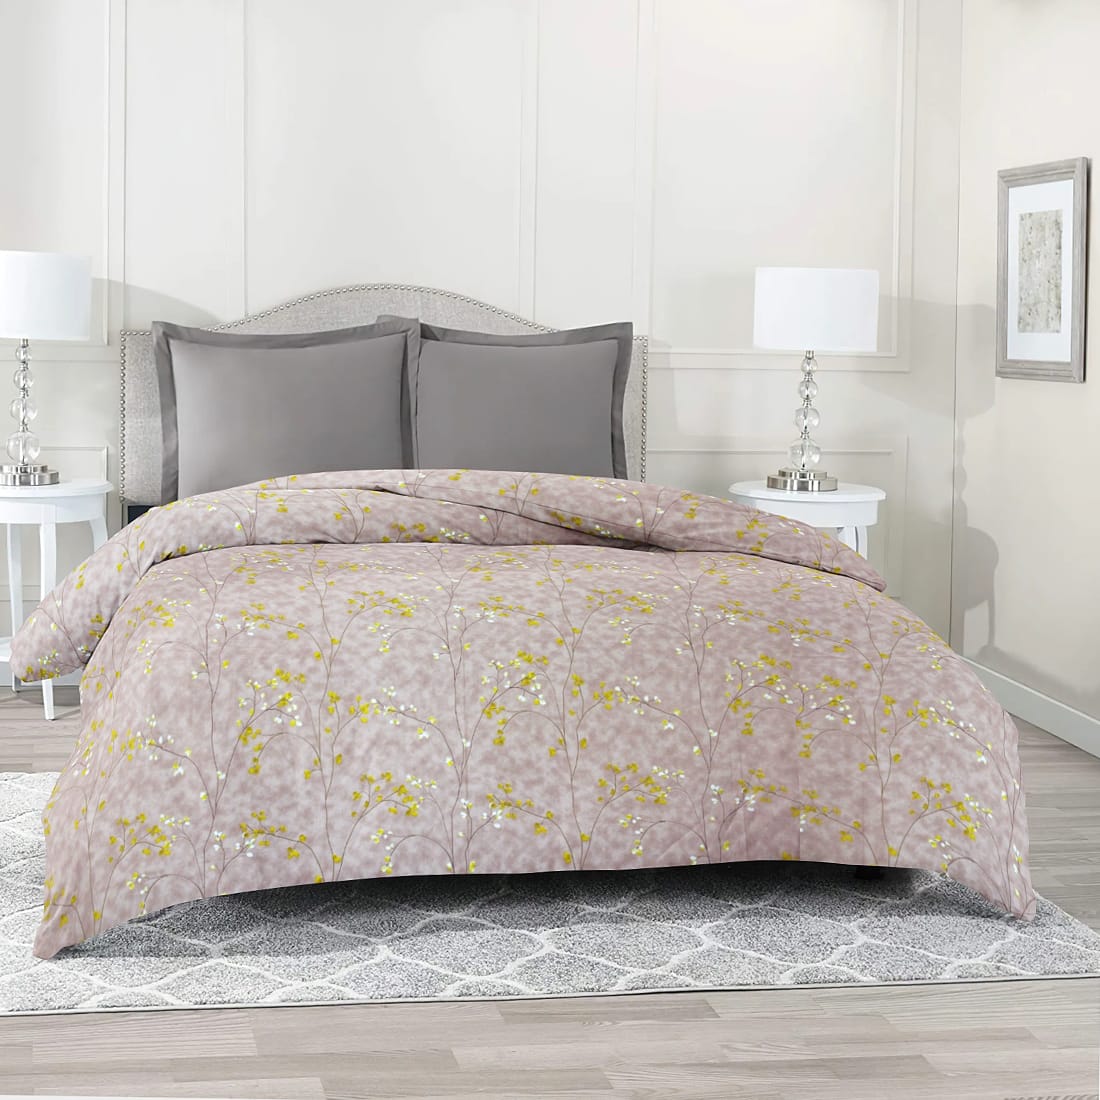 Comfy 250 TC Burgundy Floral Print Cotton Duvet Cover/Quilt Cover online in India